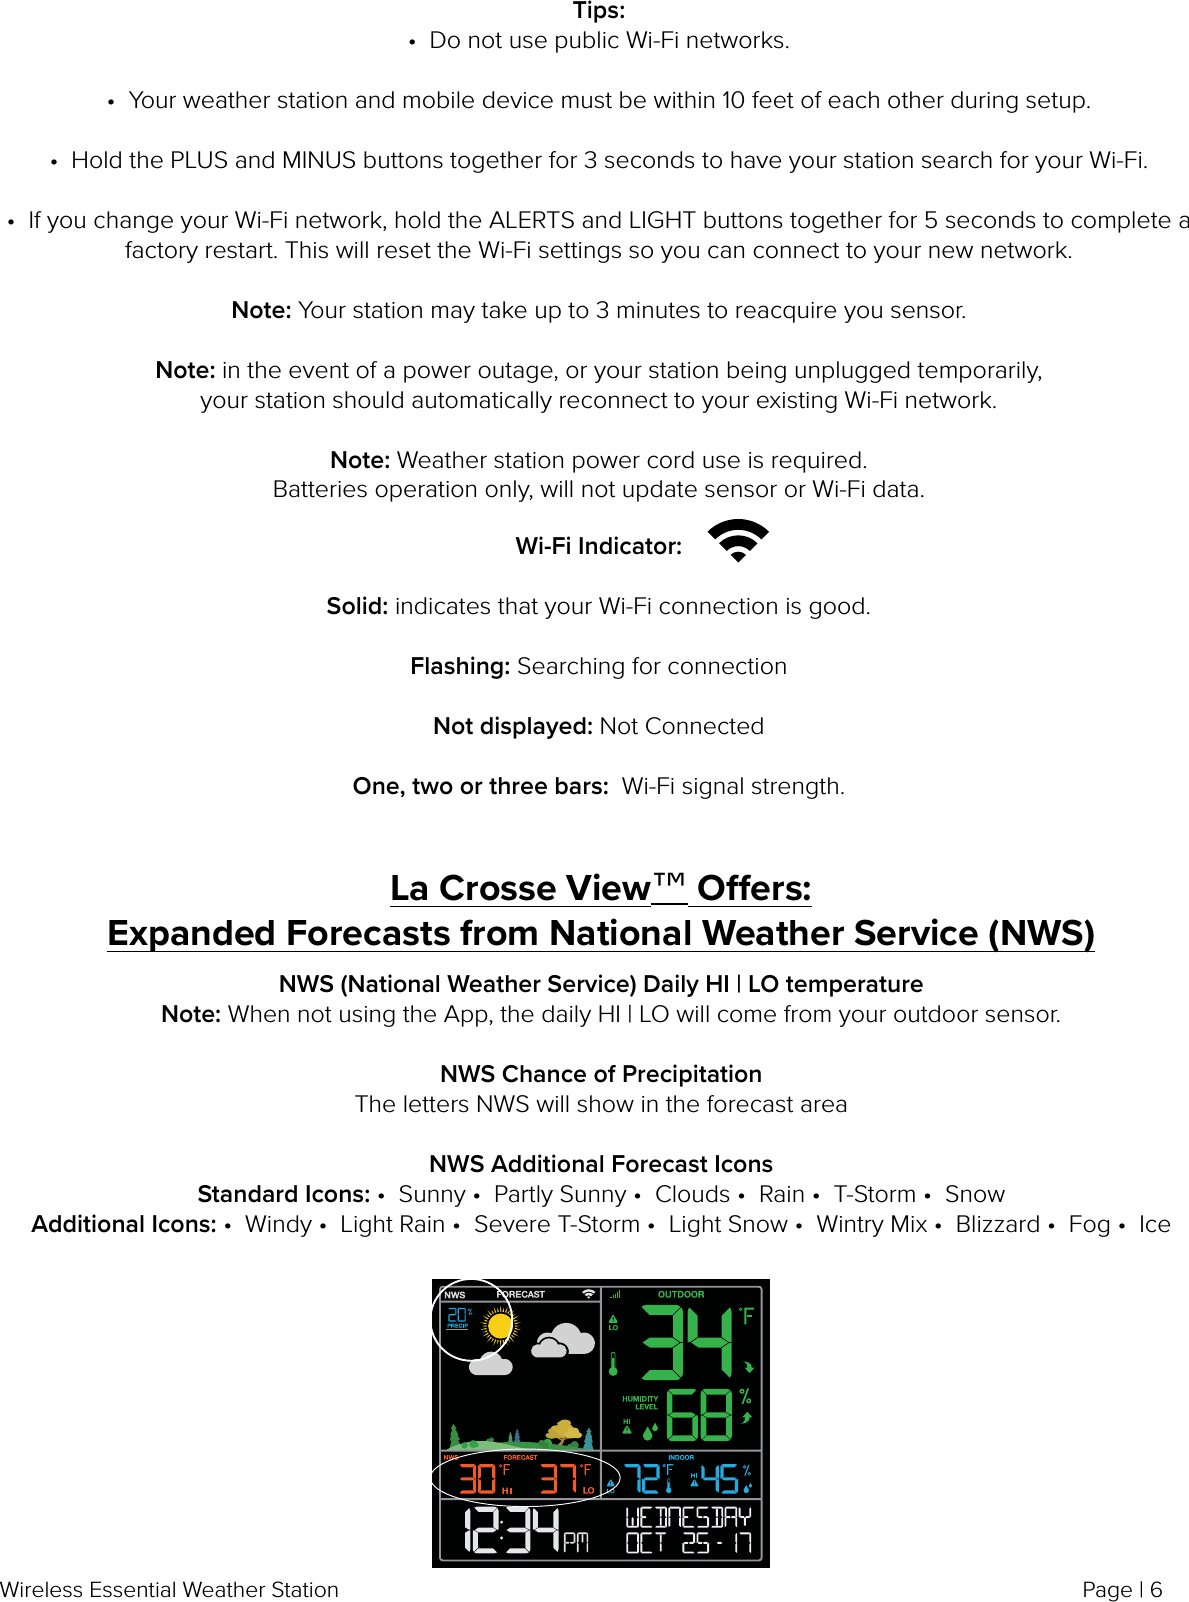 Page | 6Wireless Essential Weather StationTips:•  Do not use public Wi-Fi networks.•  Your weather station and mobile device must be within 10 feet of each other during setup. •  Hold the PLUS and MINUS buttons together for 3 seconds to have your station search for your Wi-Fi.•  If you change your Wi-Fi network, hold the ALERTS and LIGHT buttons together for 5 seconds to complete a factory restart. This will reset the Wi-Fi settings so you can connect to your new network. Note: Your station may take up to 3 minutes to reacquire you sensor.Note: in the event of a power outage, or your station being unplugged temporarily, your station should automatically reconnect to your existing Wi-Fi network.  Note: Weather station power cord use is required. Batteries operation only, will not update sensor or Wi-Fi data. Wi-Fi Indicator: Solid: indicates that your Wi-Fi connection is good.Flashing: Searching for connectionNot displayed: Not ConnectedOne, two or three bars:  Wi-Fi signal strength.La Crosse View™ Oers:Expanded Forecasts from National Weather Service (NWS)NWS (National Weather Service) Daily HI | LO temperature    Note: When not using the App, the daily HI | LO will come from your outdoor sensor.  NWS Chance of PrecipitationThe letters NWS will show in the forecast areaNWS Additional Forecast IconsStandard Icons: •  Sunny •  Partly Sunny •  Clouds •  Rain •  T-Storm •  SnowAdditional Icons: •  Windy •  Light Rain •  Severe T-Storm •  Light Snow •  Wintry Mix •  Blizzard •  Fog •  Ice